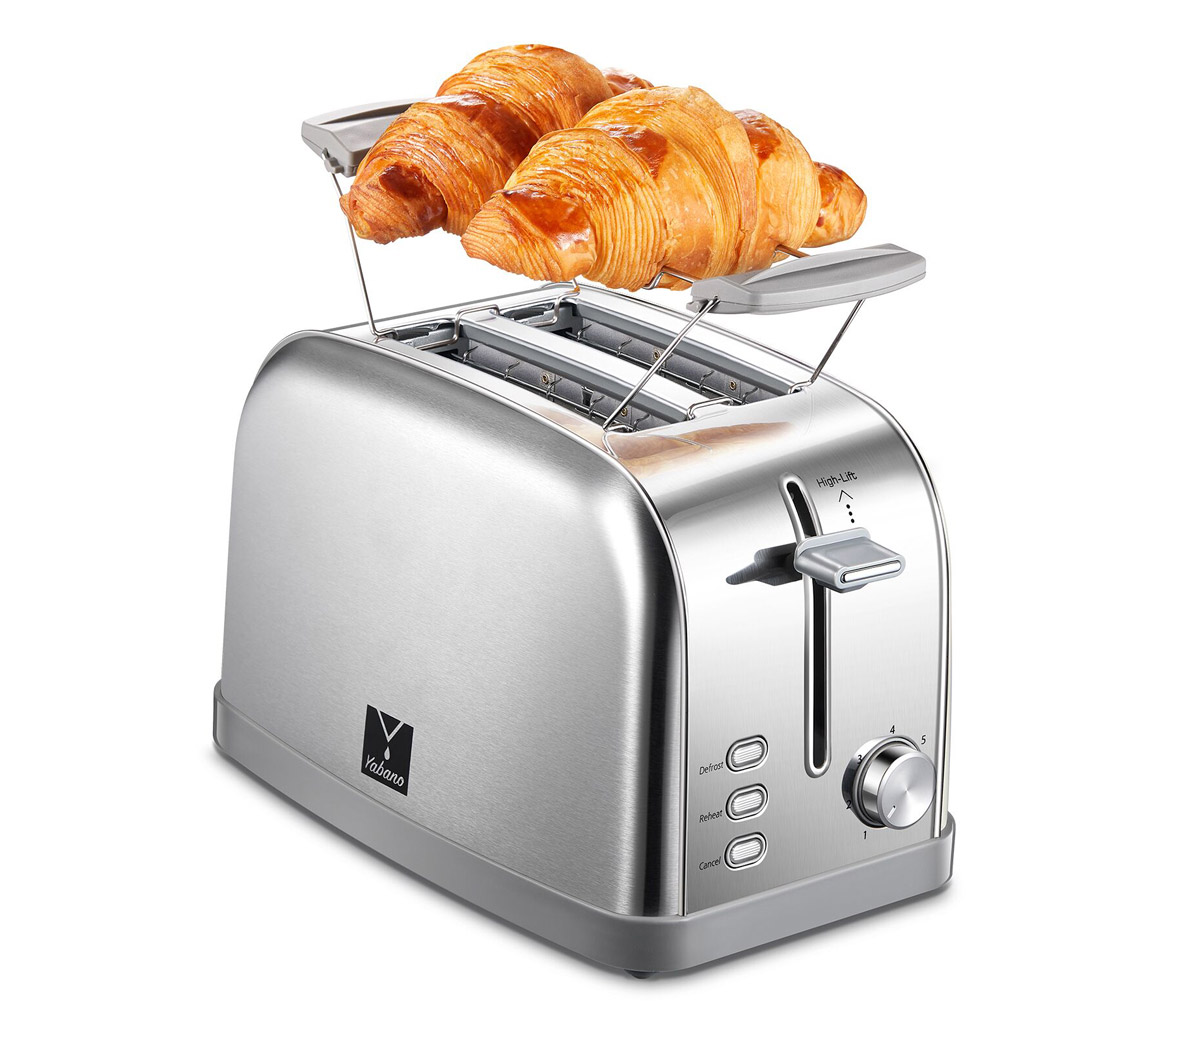 2 slice toaster, Retro Bagel Toaster Toaster with 7 Bread Shade Settings, 2 Extra Wide Slots, Defrost/Bagel/Cancel Function, Removable Crumb Tray, Stainless Steel Toaster by Yabano